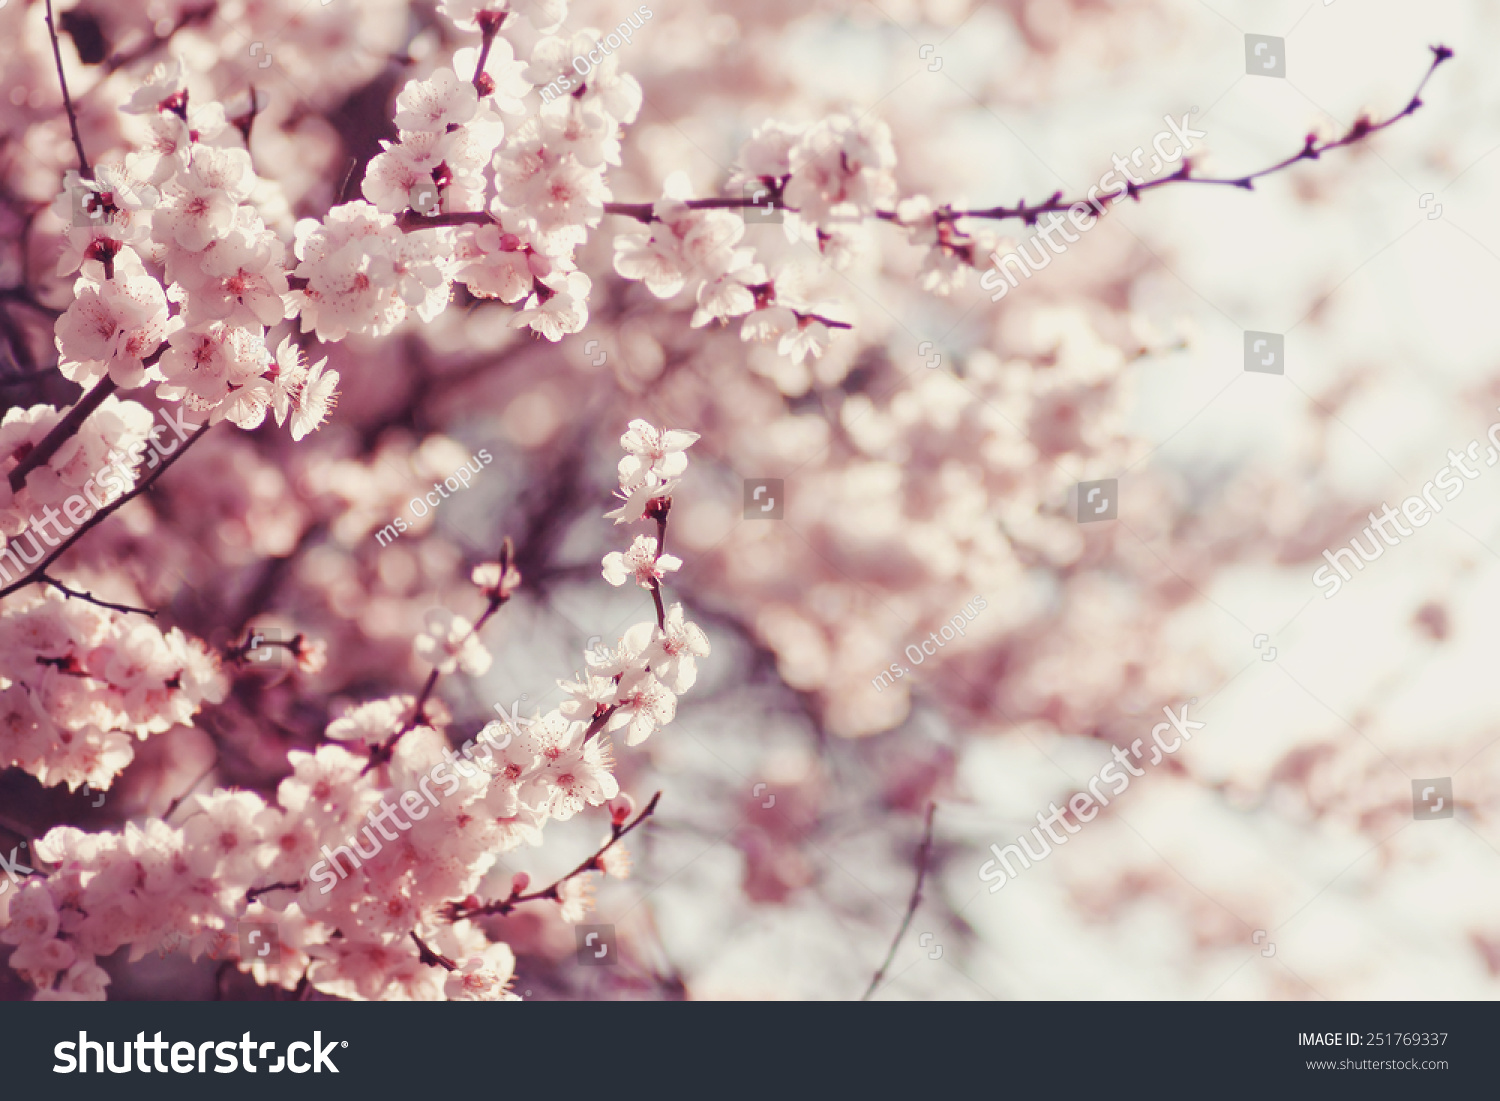 Spring Cherry blossoms, pink flowers. #251769337